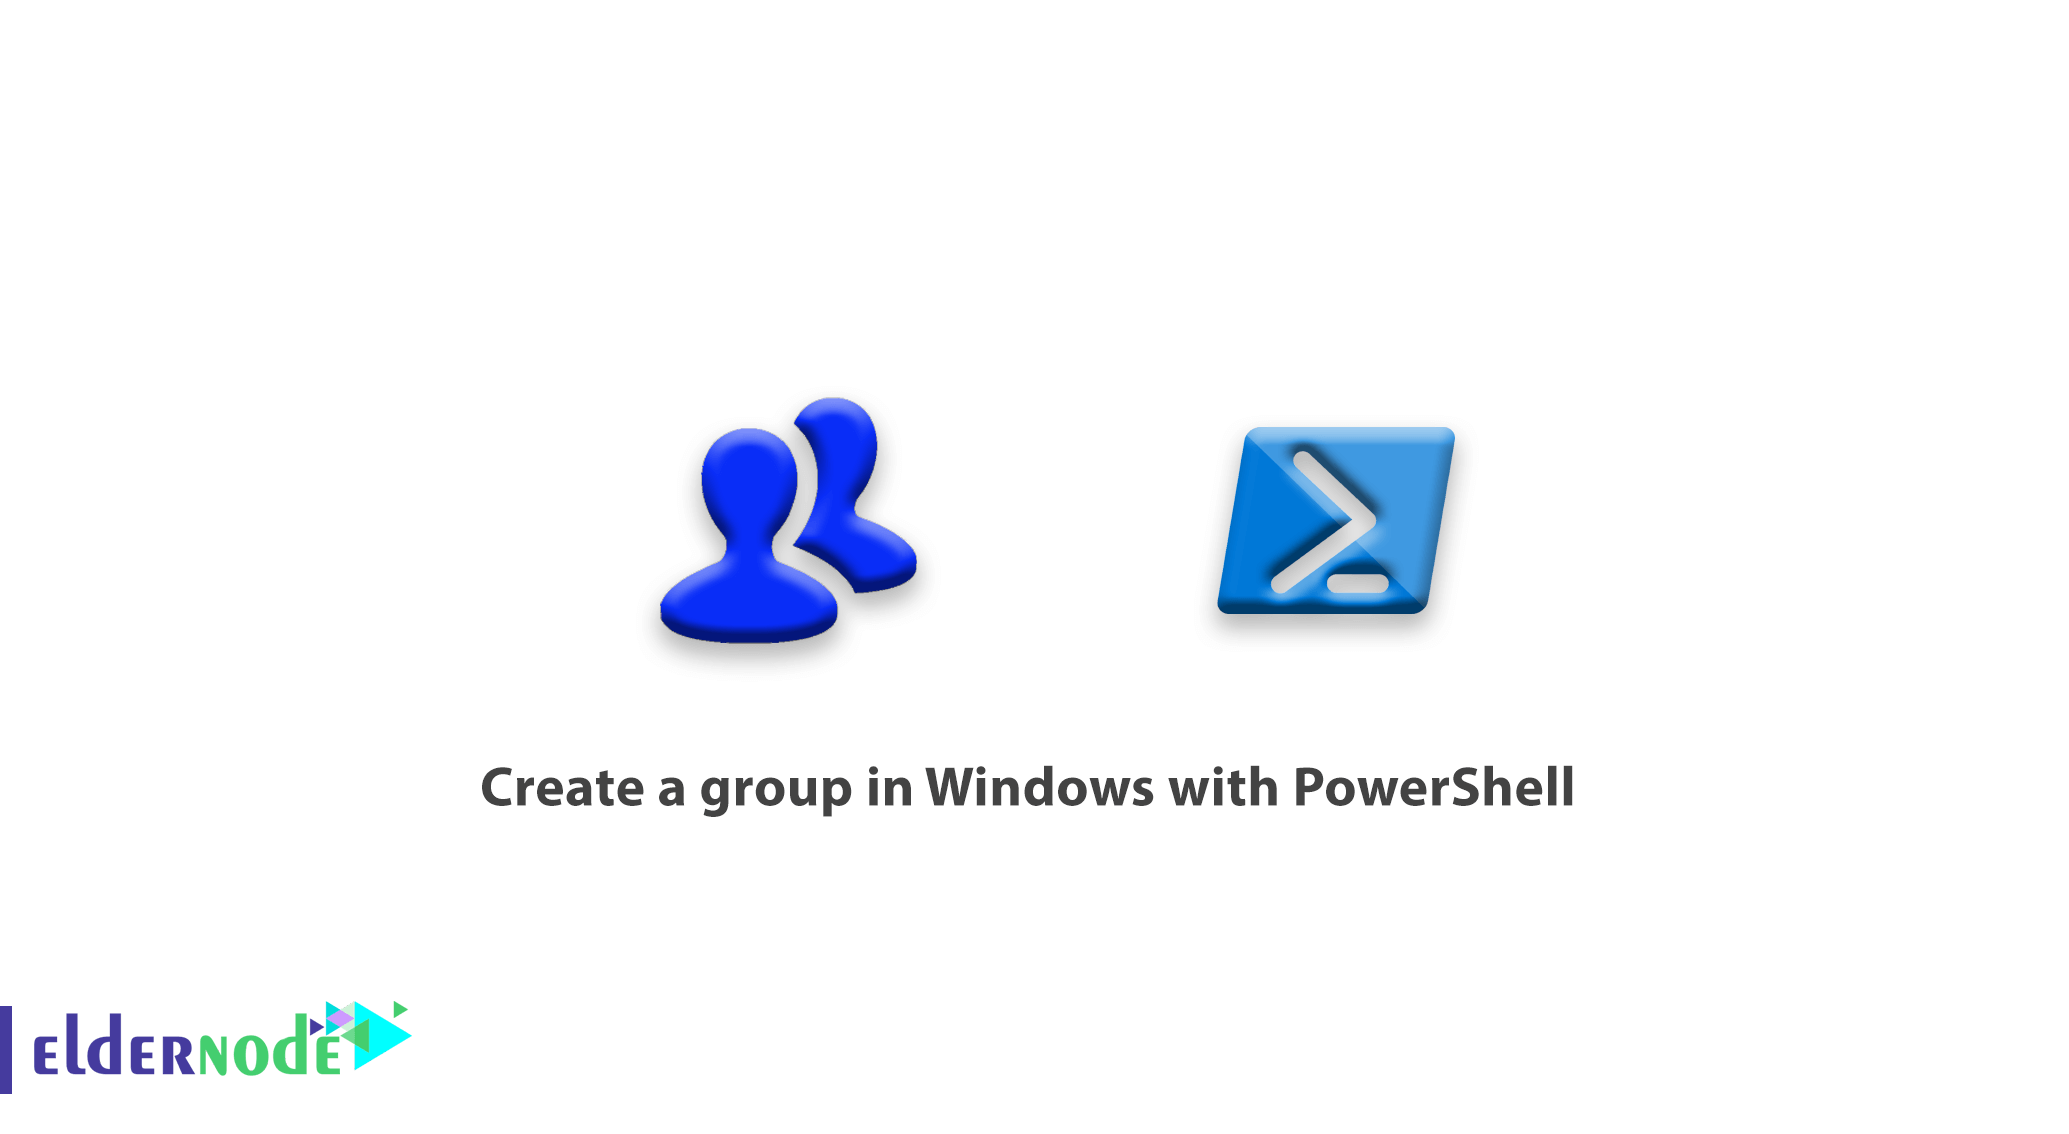 How to Create a group in Windows with PowerShell